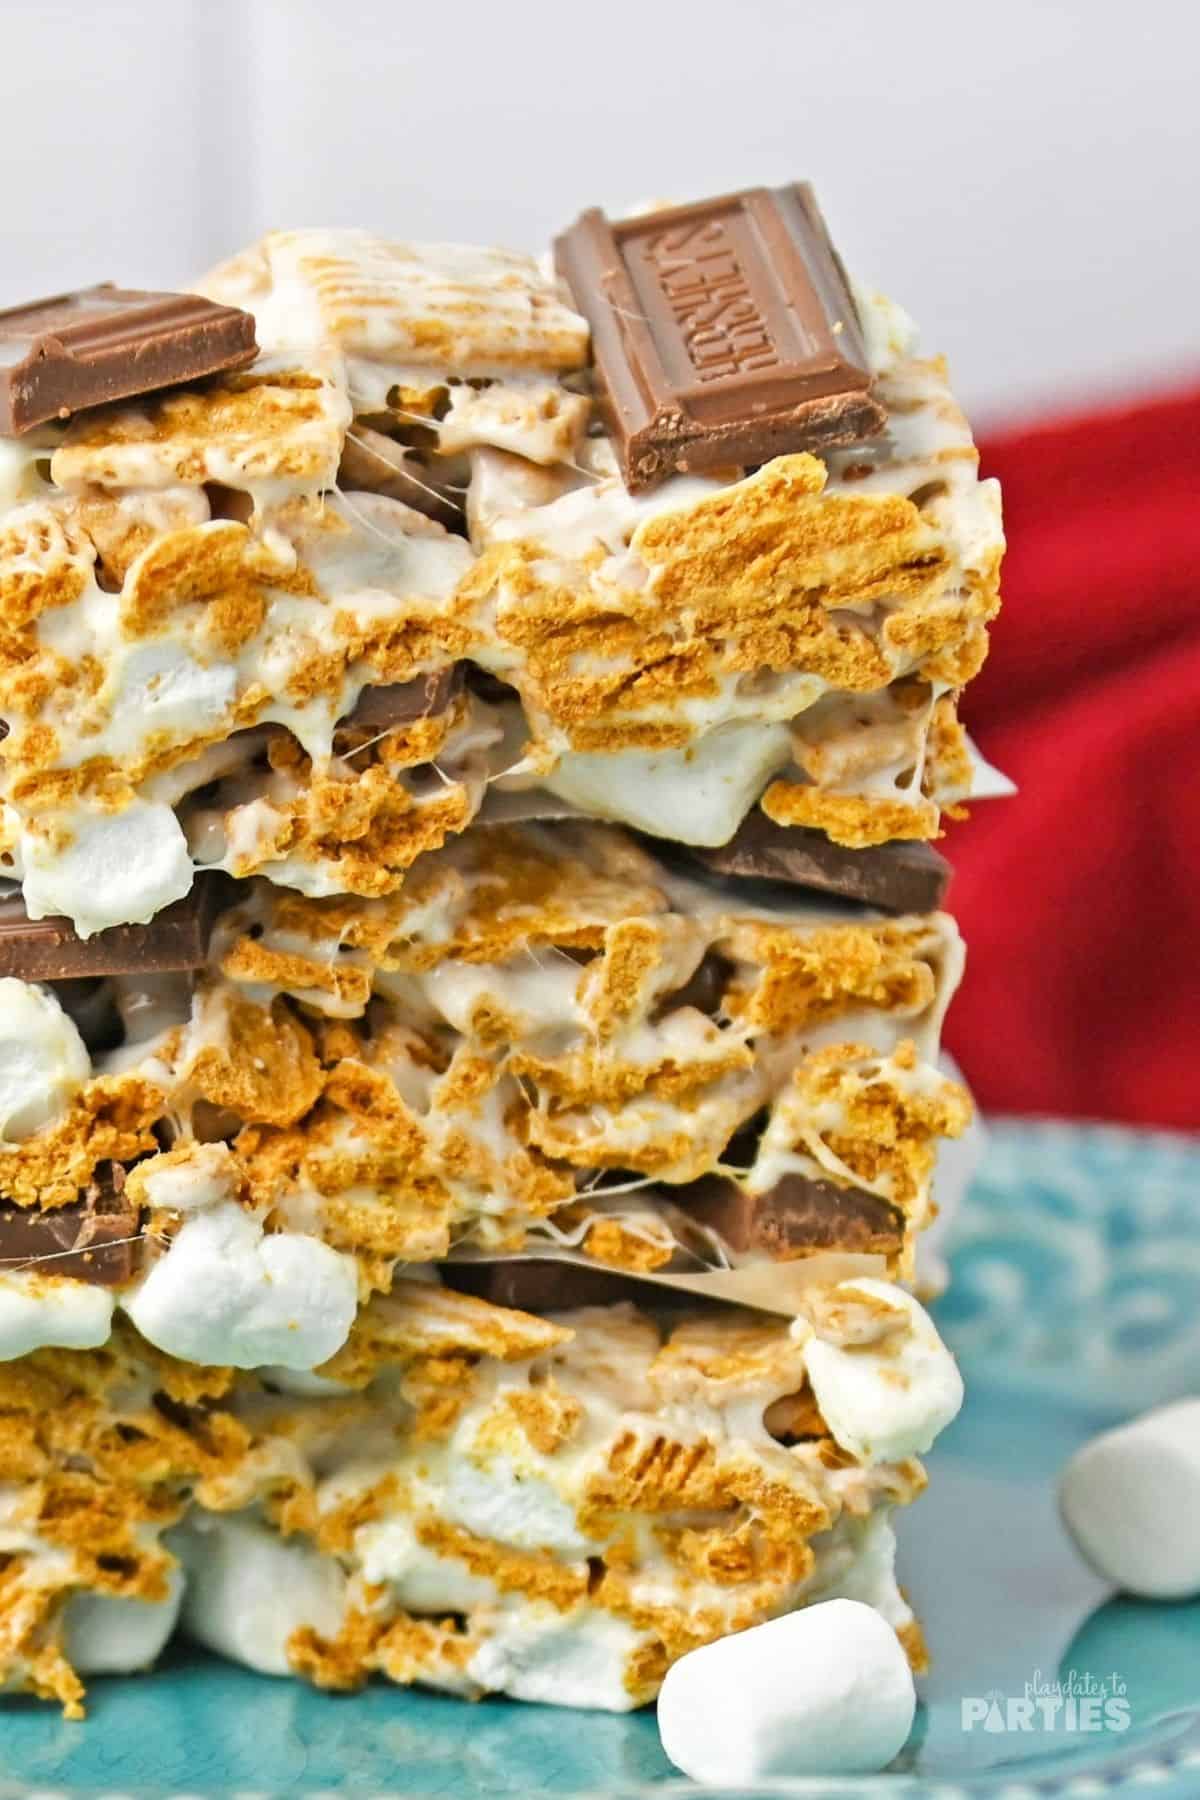 The sides of the cut bars reveal layers of crunchy cereal with gooey marshmallow.